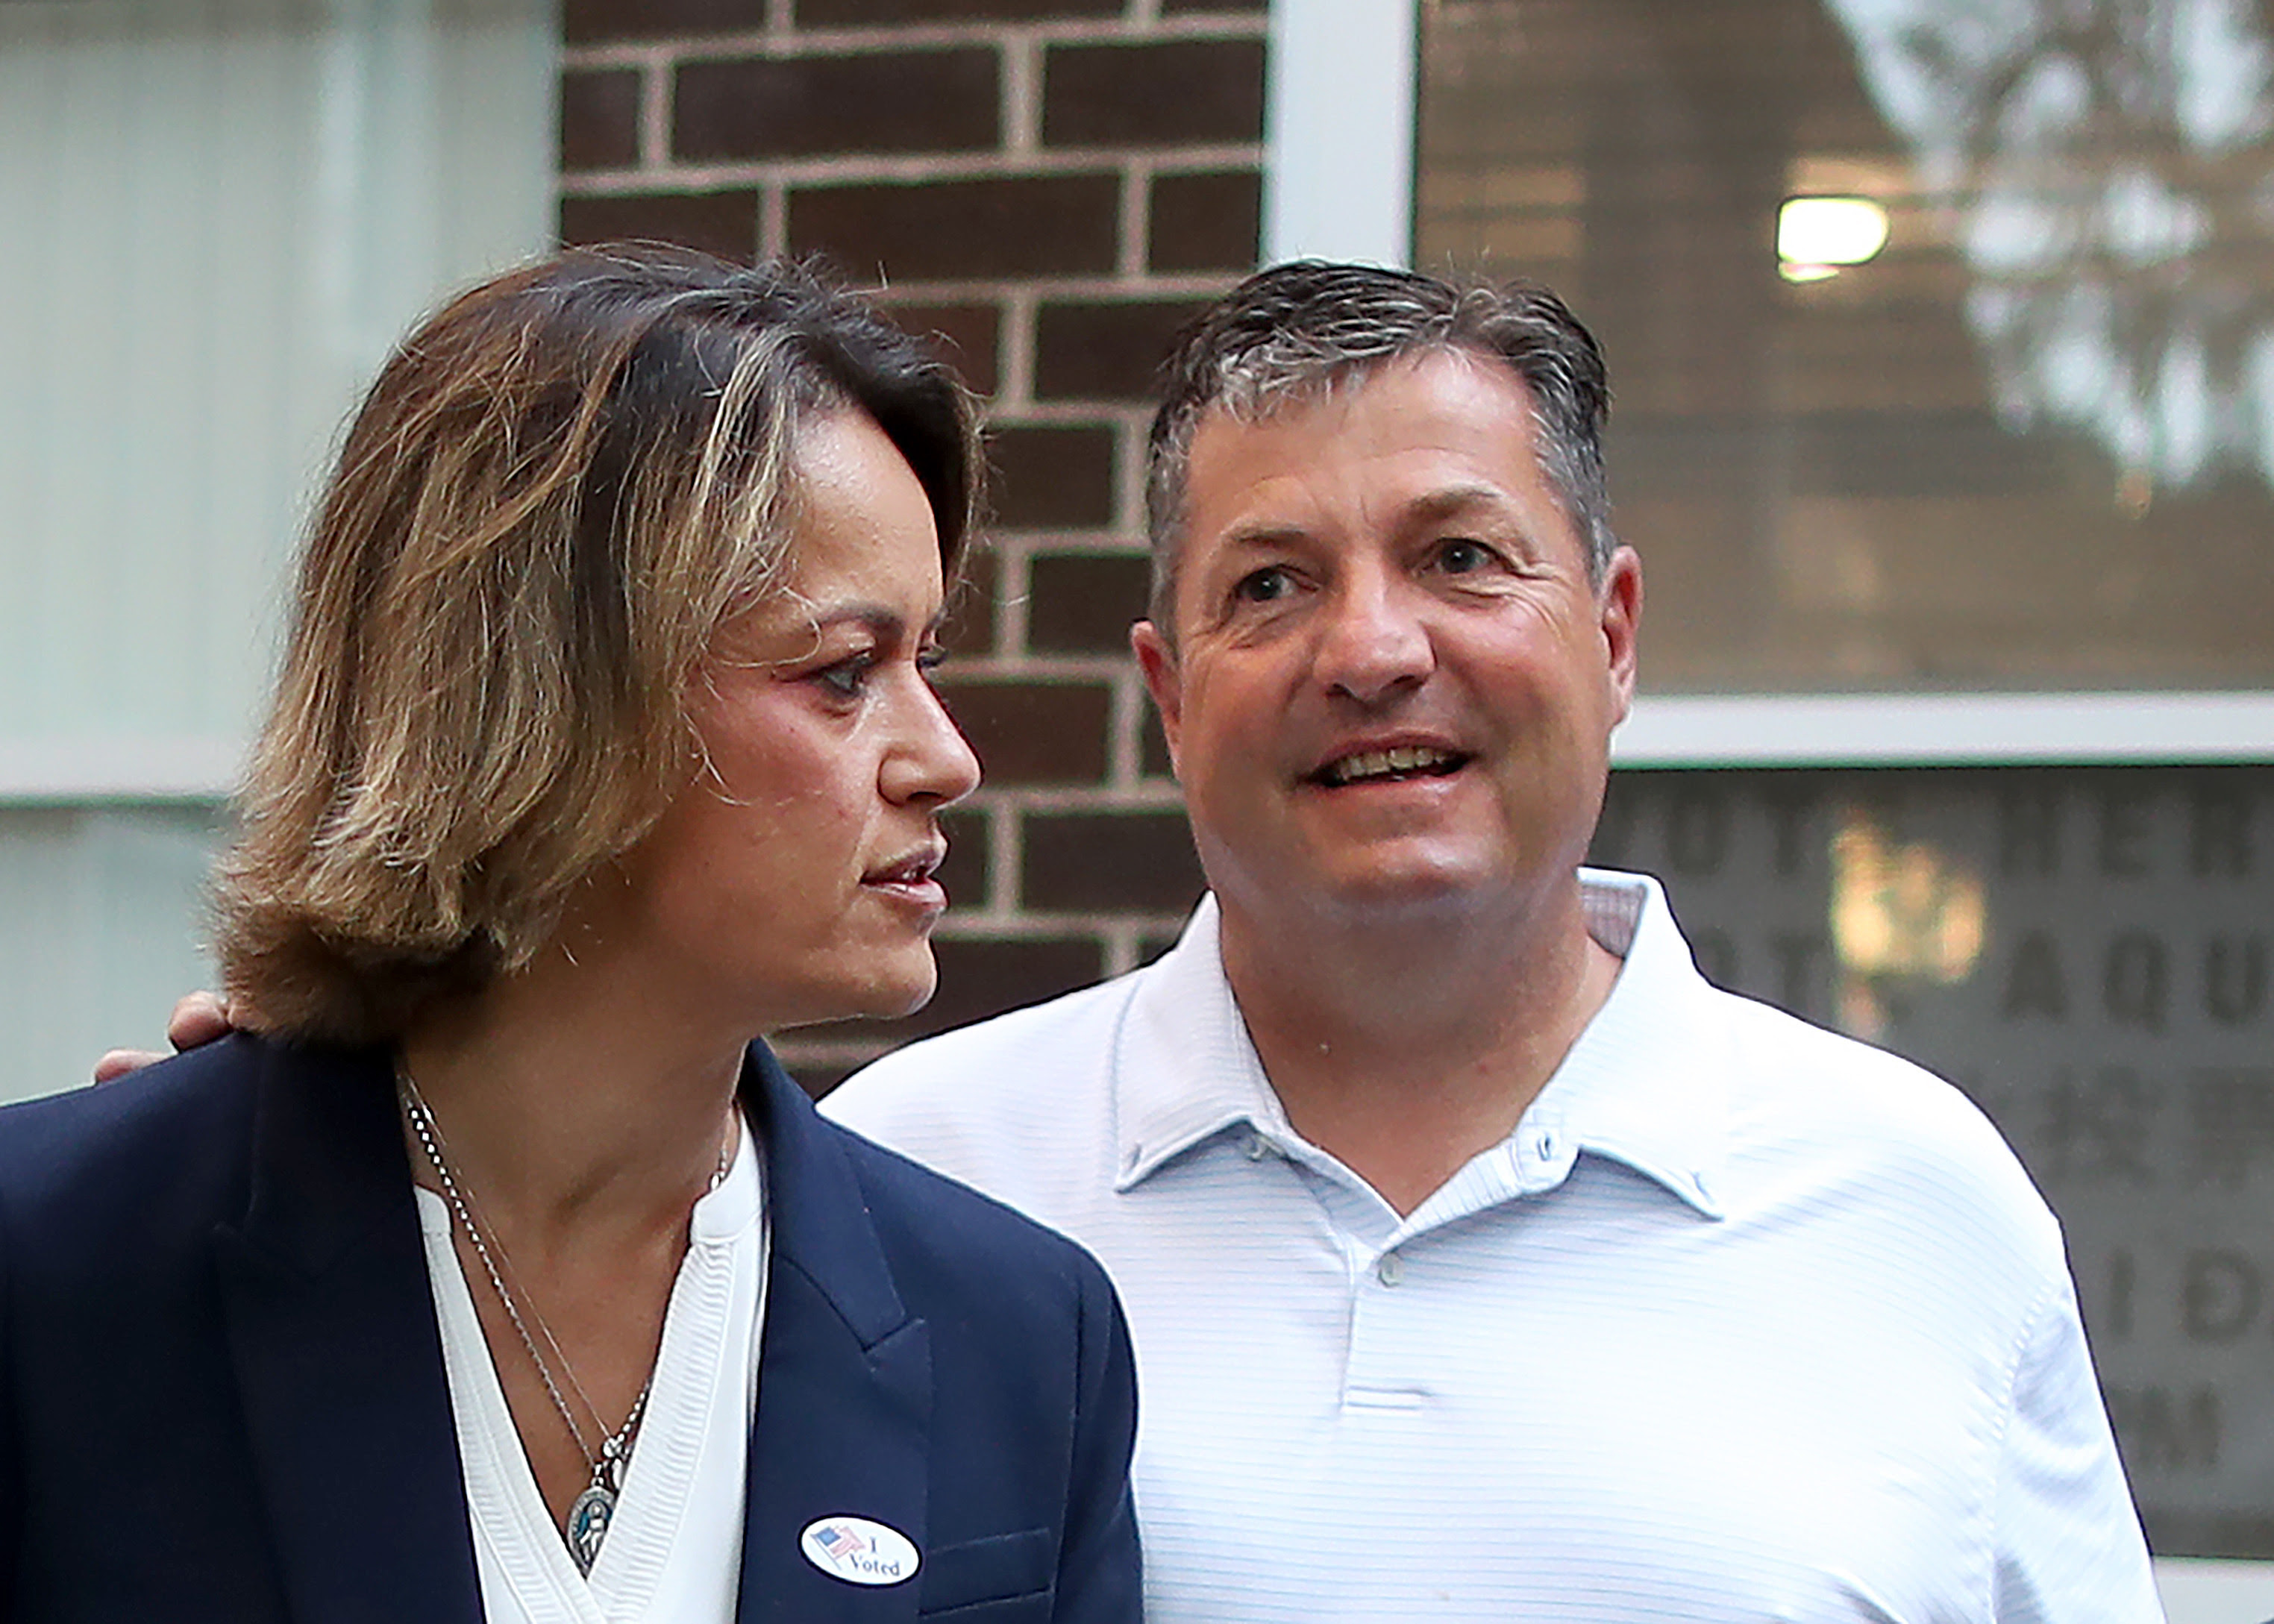 Douglas George with his wife, Annissa Essaibi George, after she voted in the preliminary election.